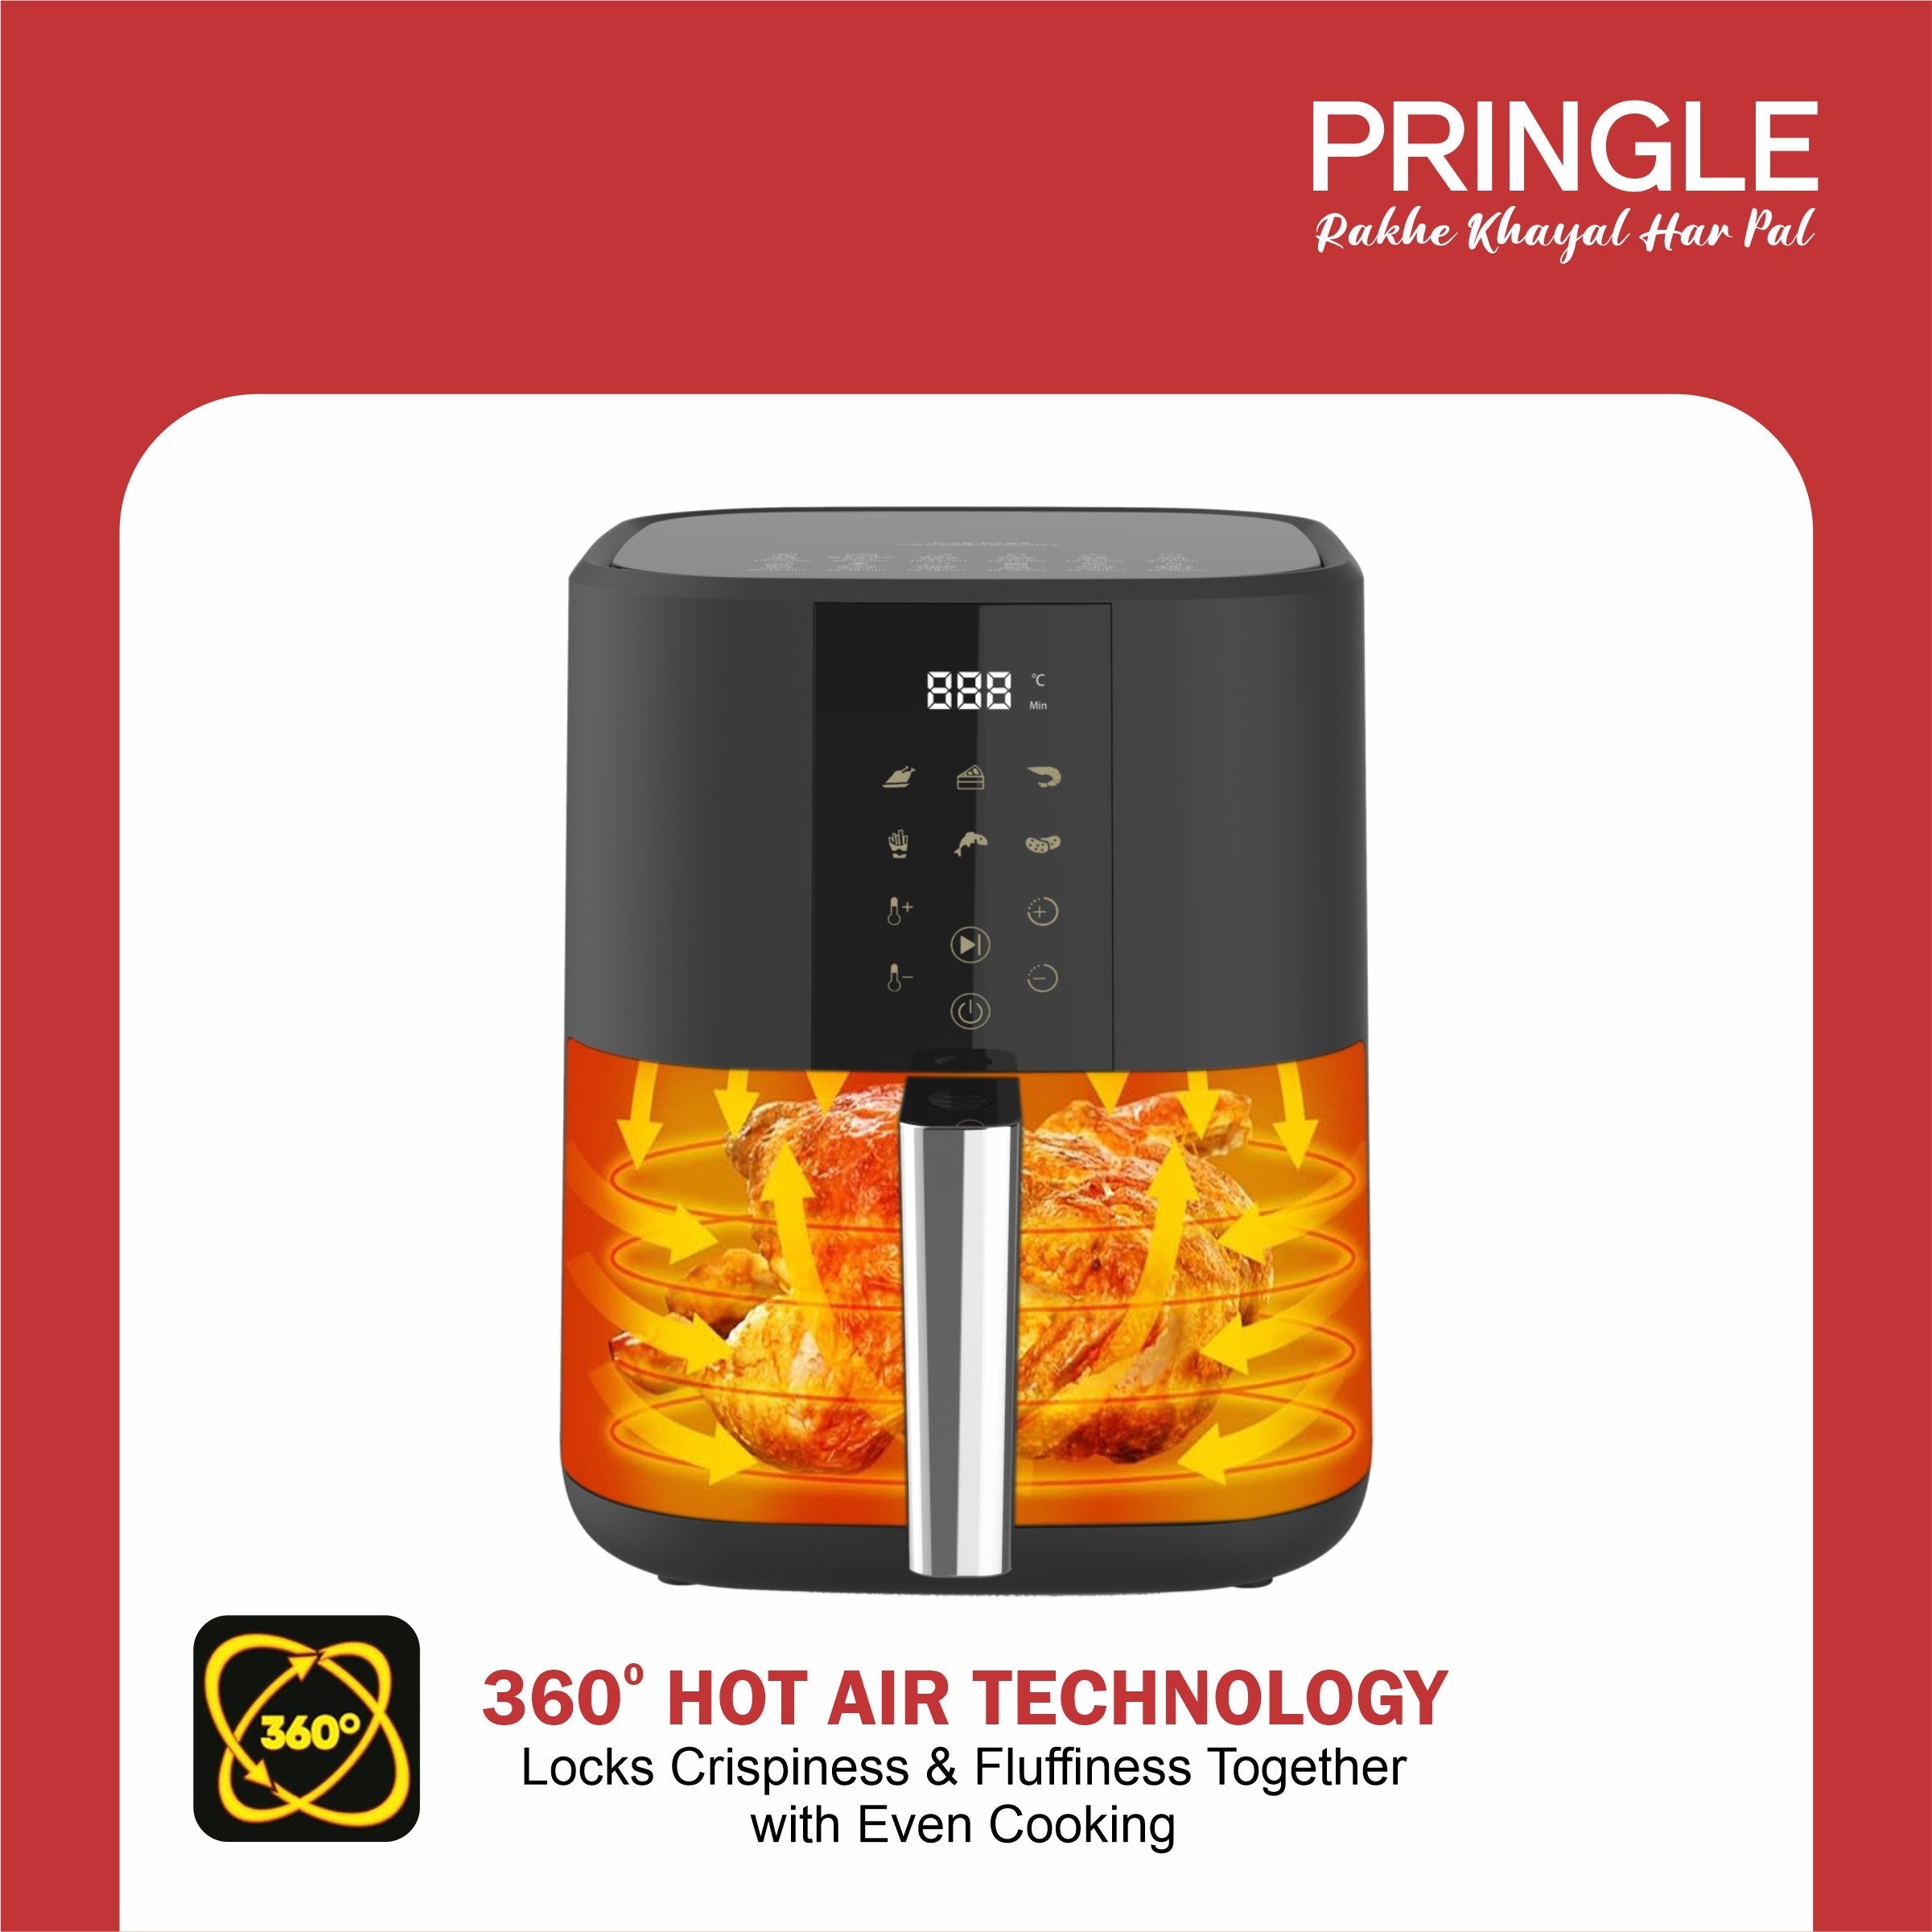 Pringle AF1406 Digital Air Fryer, 360° High Speed Air Circulation Technology 1350 W with Non-Stick 4.2 L Basket-Green - Pringle Appliances